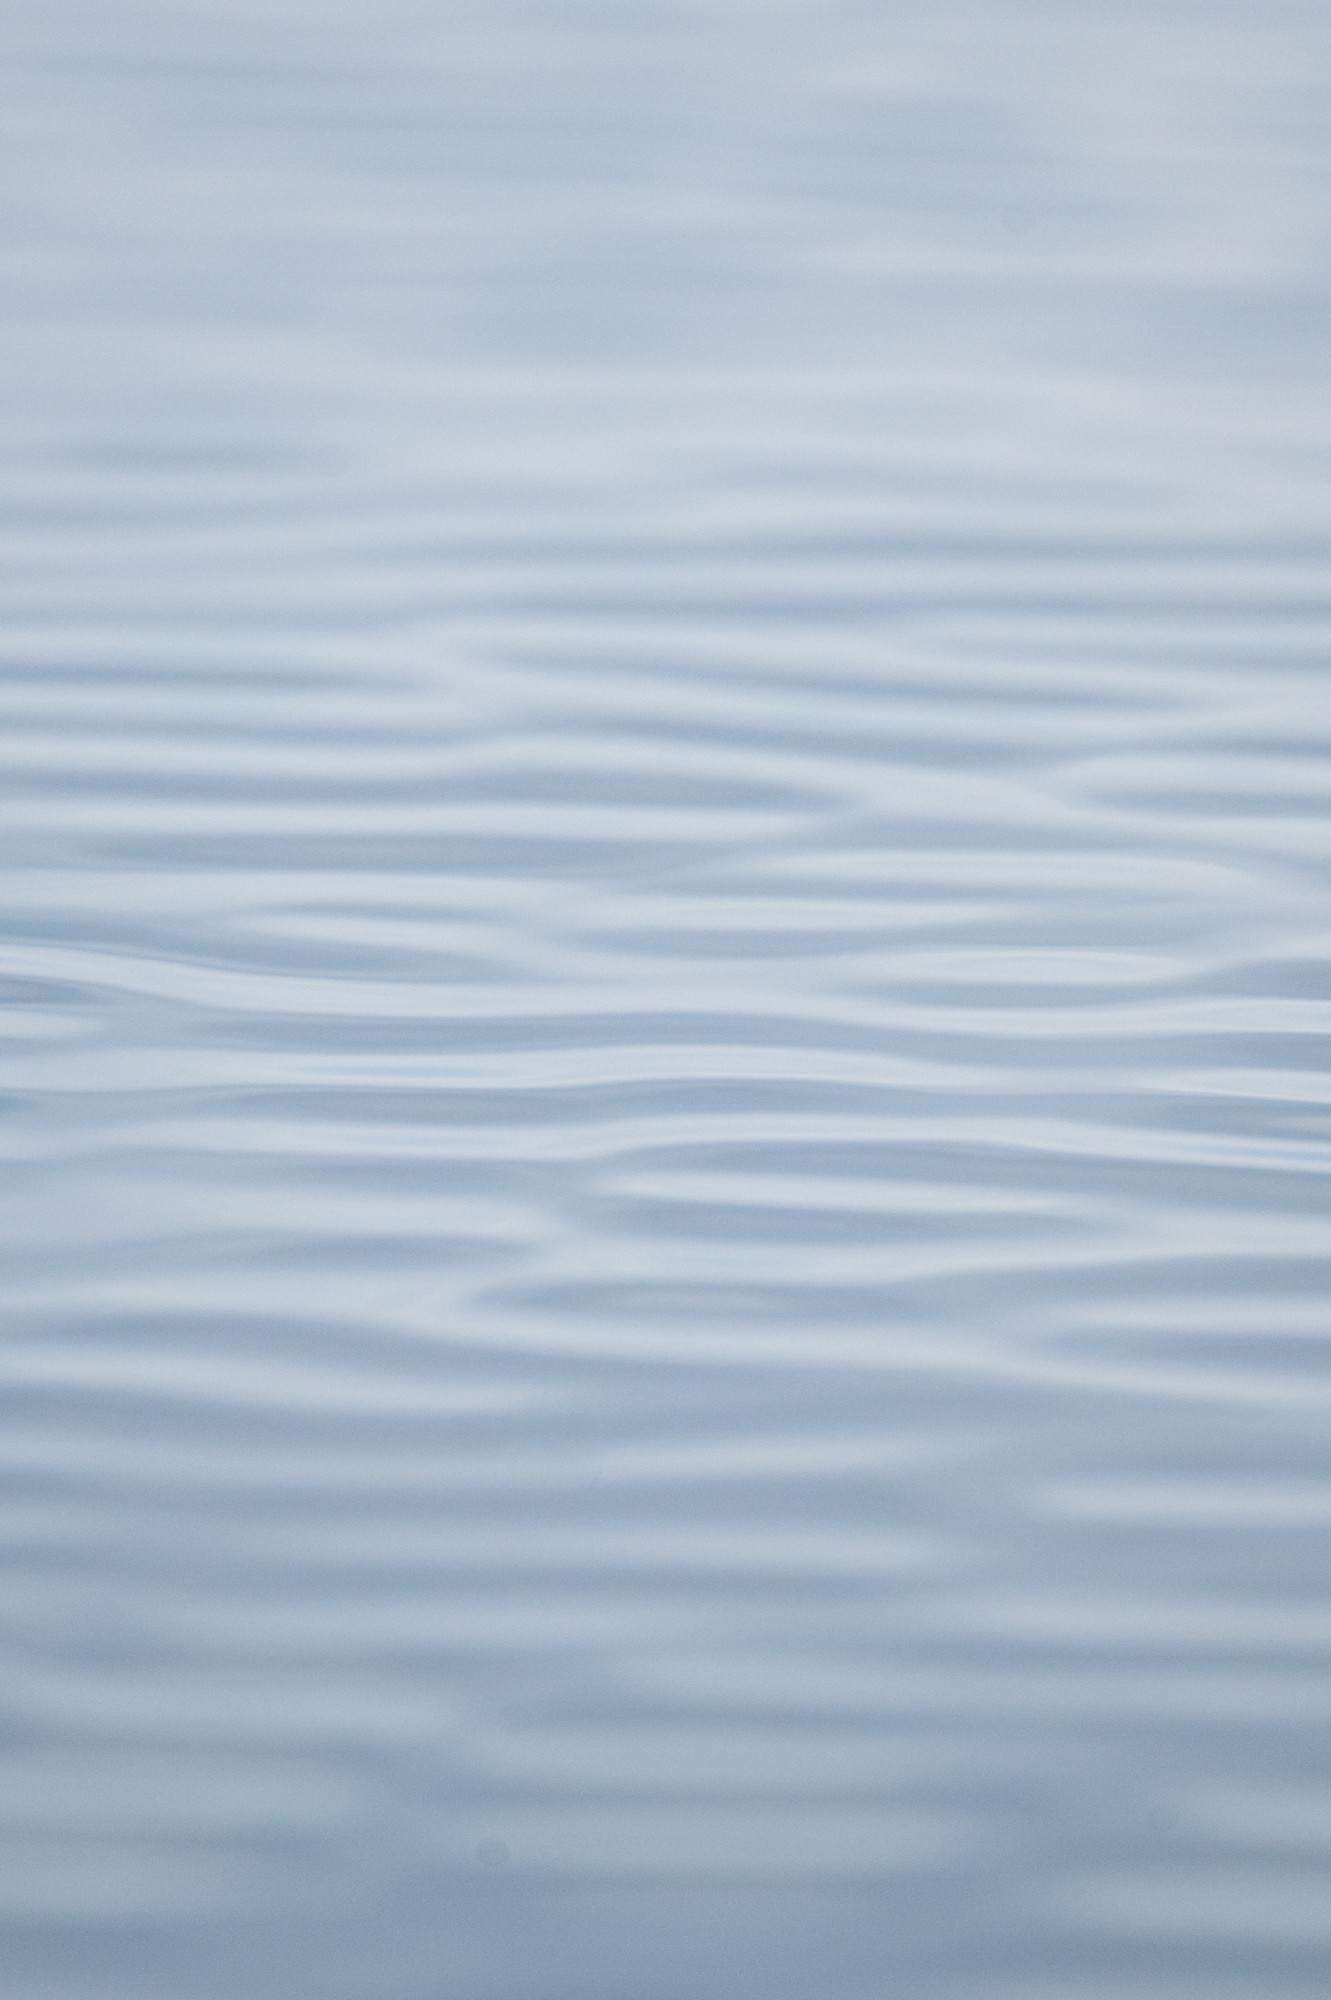 Harder, tighter ripples in open water under a grey sky